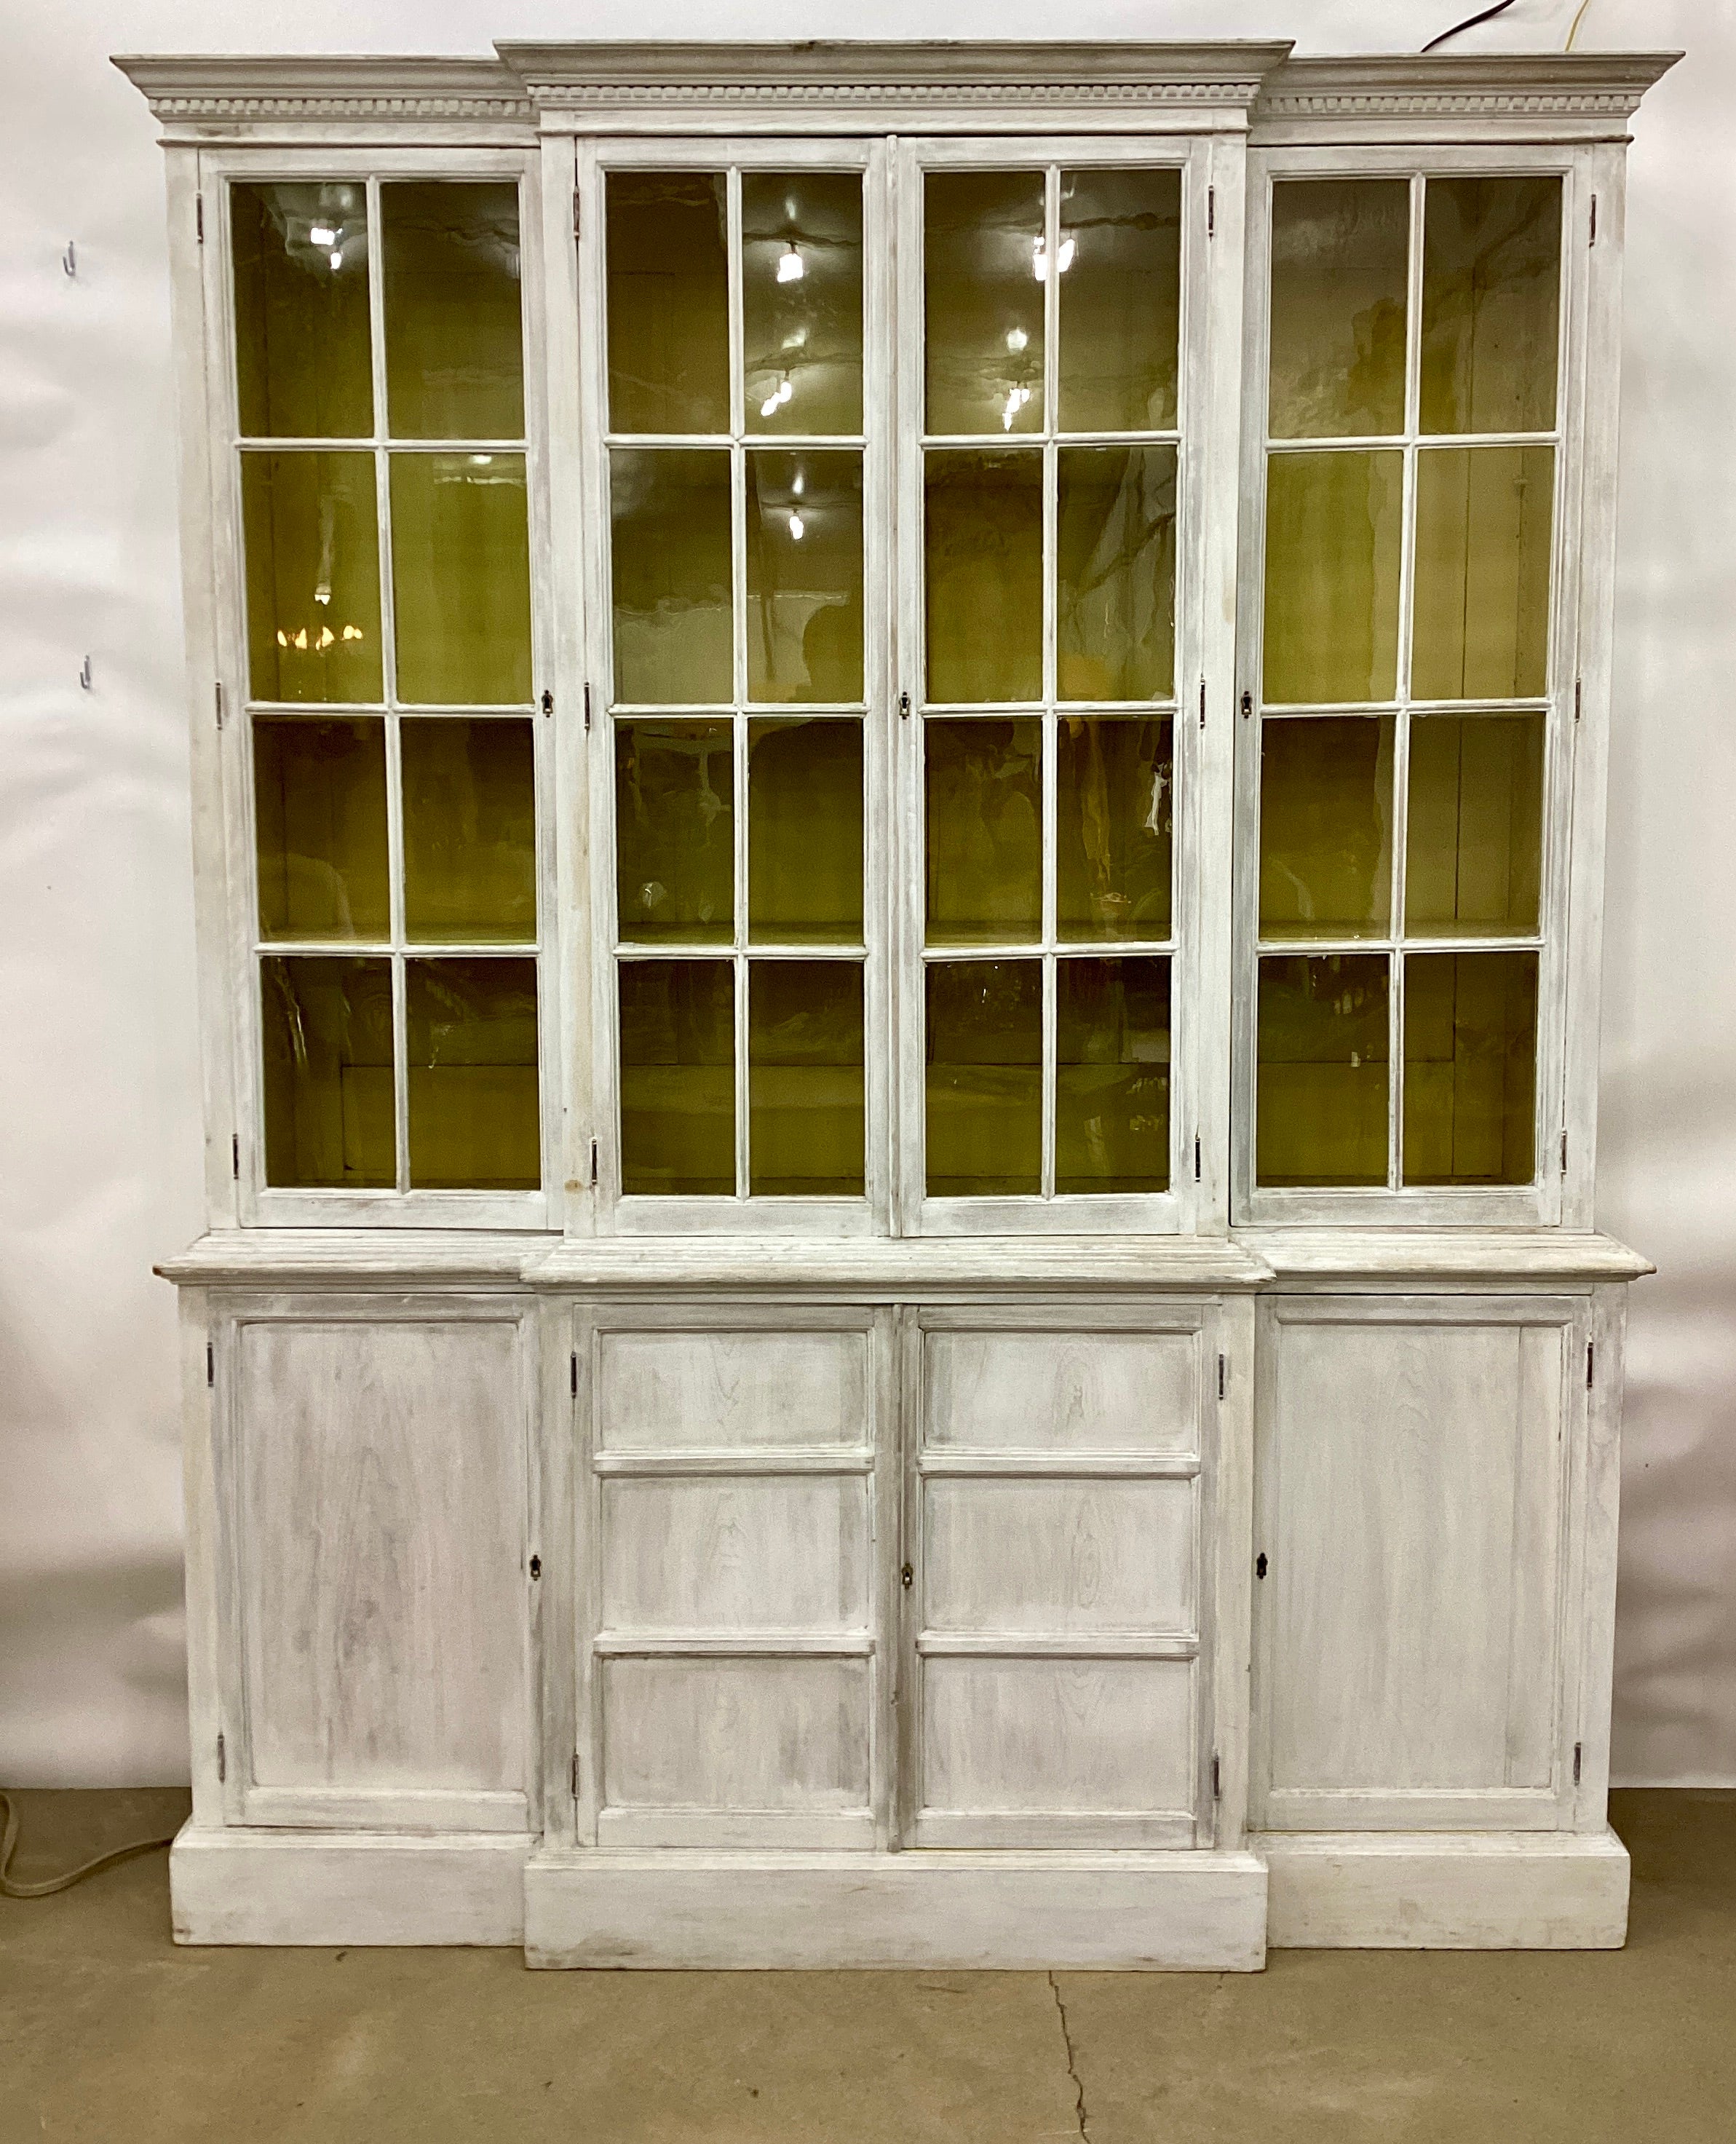 Fabulously proportioned and well sized two-part painted Pine English bookcase/cabinet from the late circa 19th century featuring a glazed upper section with two doors flanking a center double door and lined with adjustable shelves with a fun yellow